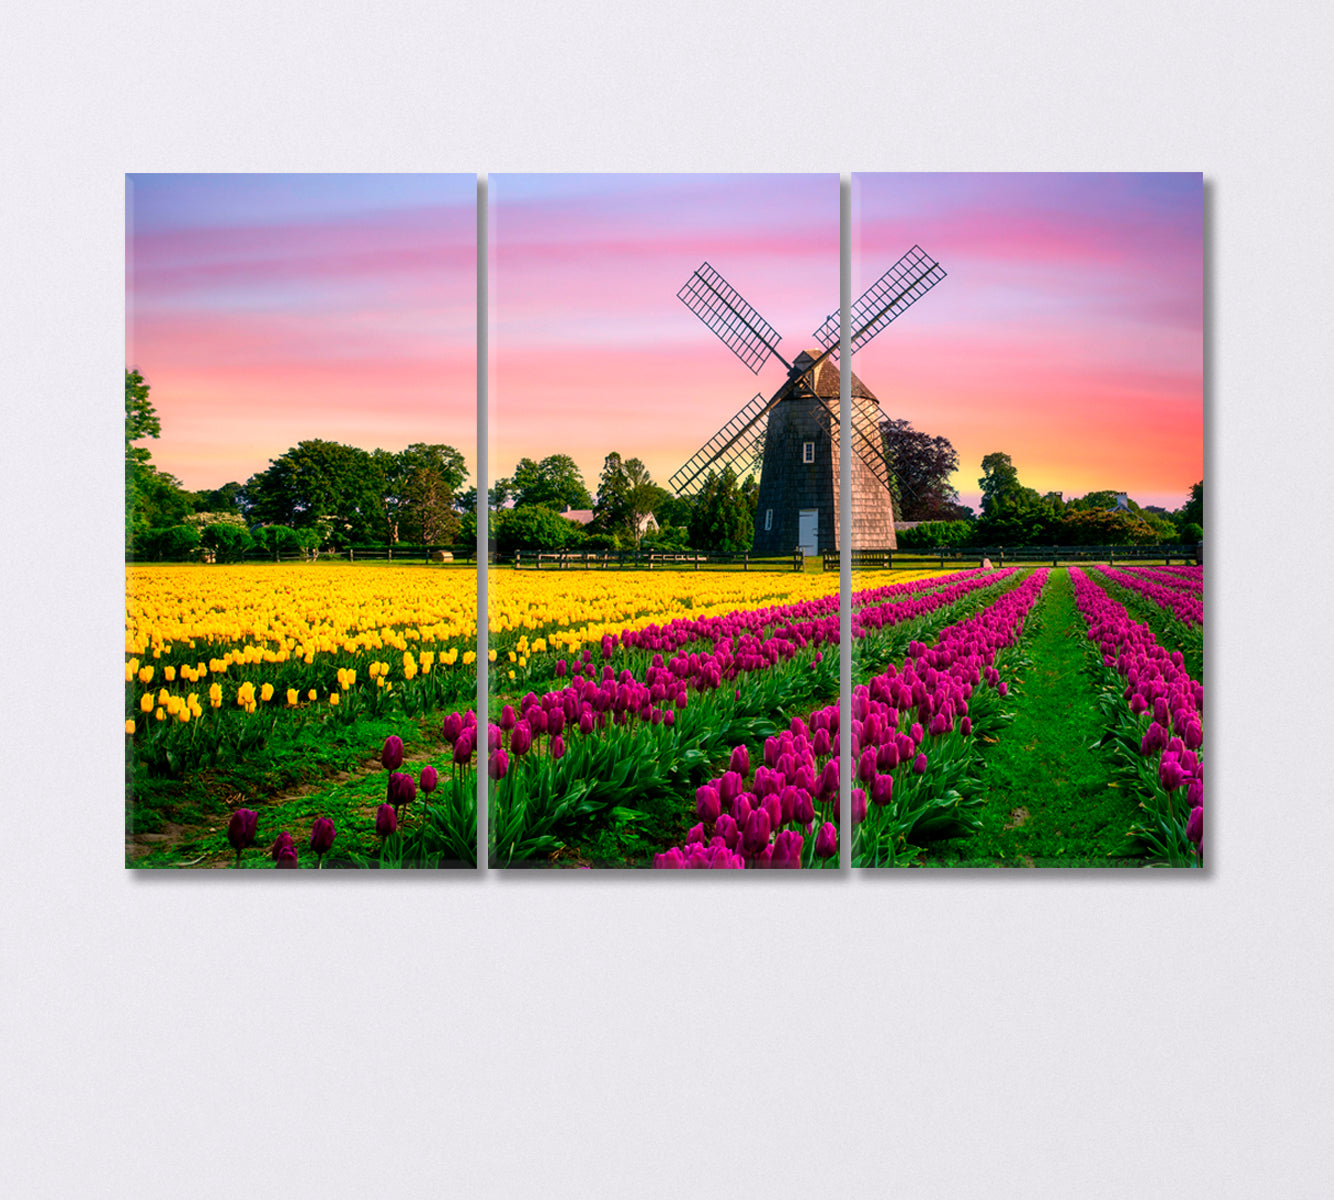 Windmill in Beautiful Color Tulips Field Canvas Print-Canvas Print-CetArt-3 Panels-36x24 inches-CetArt